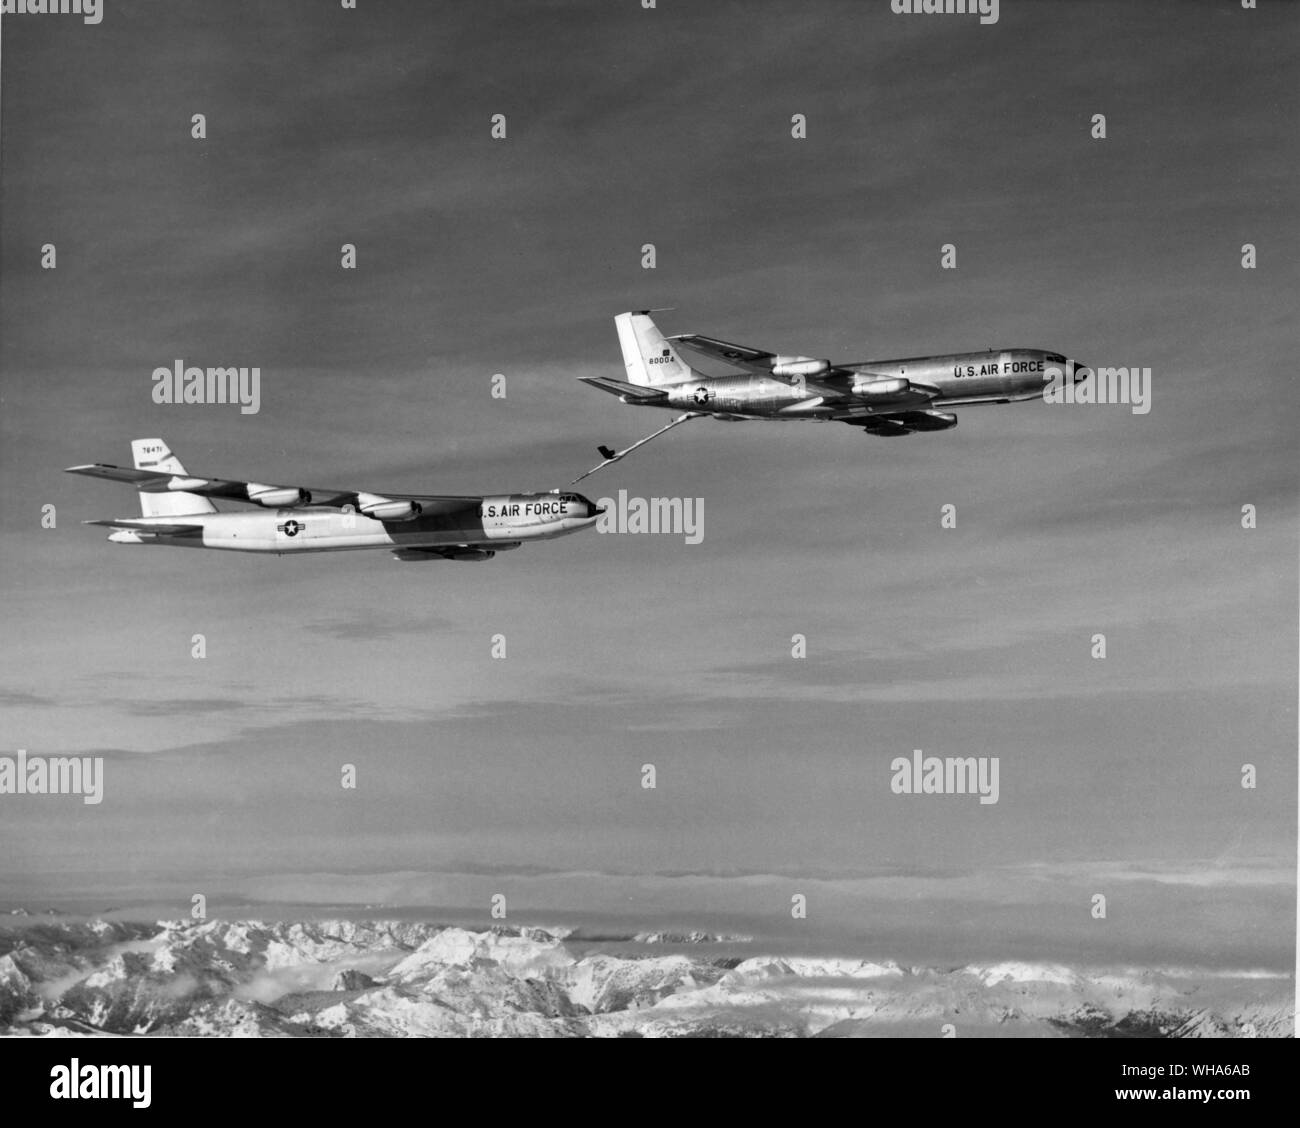 Boeing Airplanes. US Air Force Stock Photo